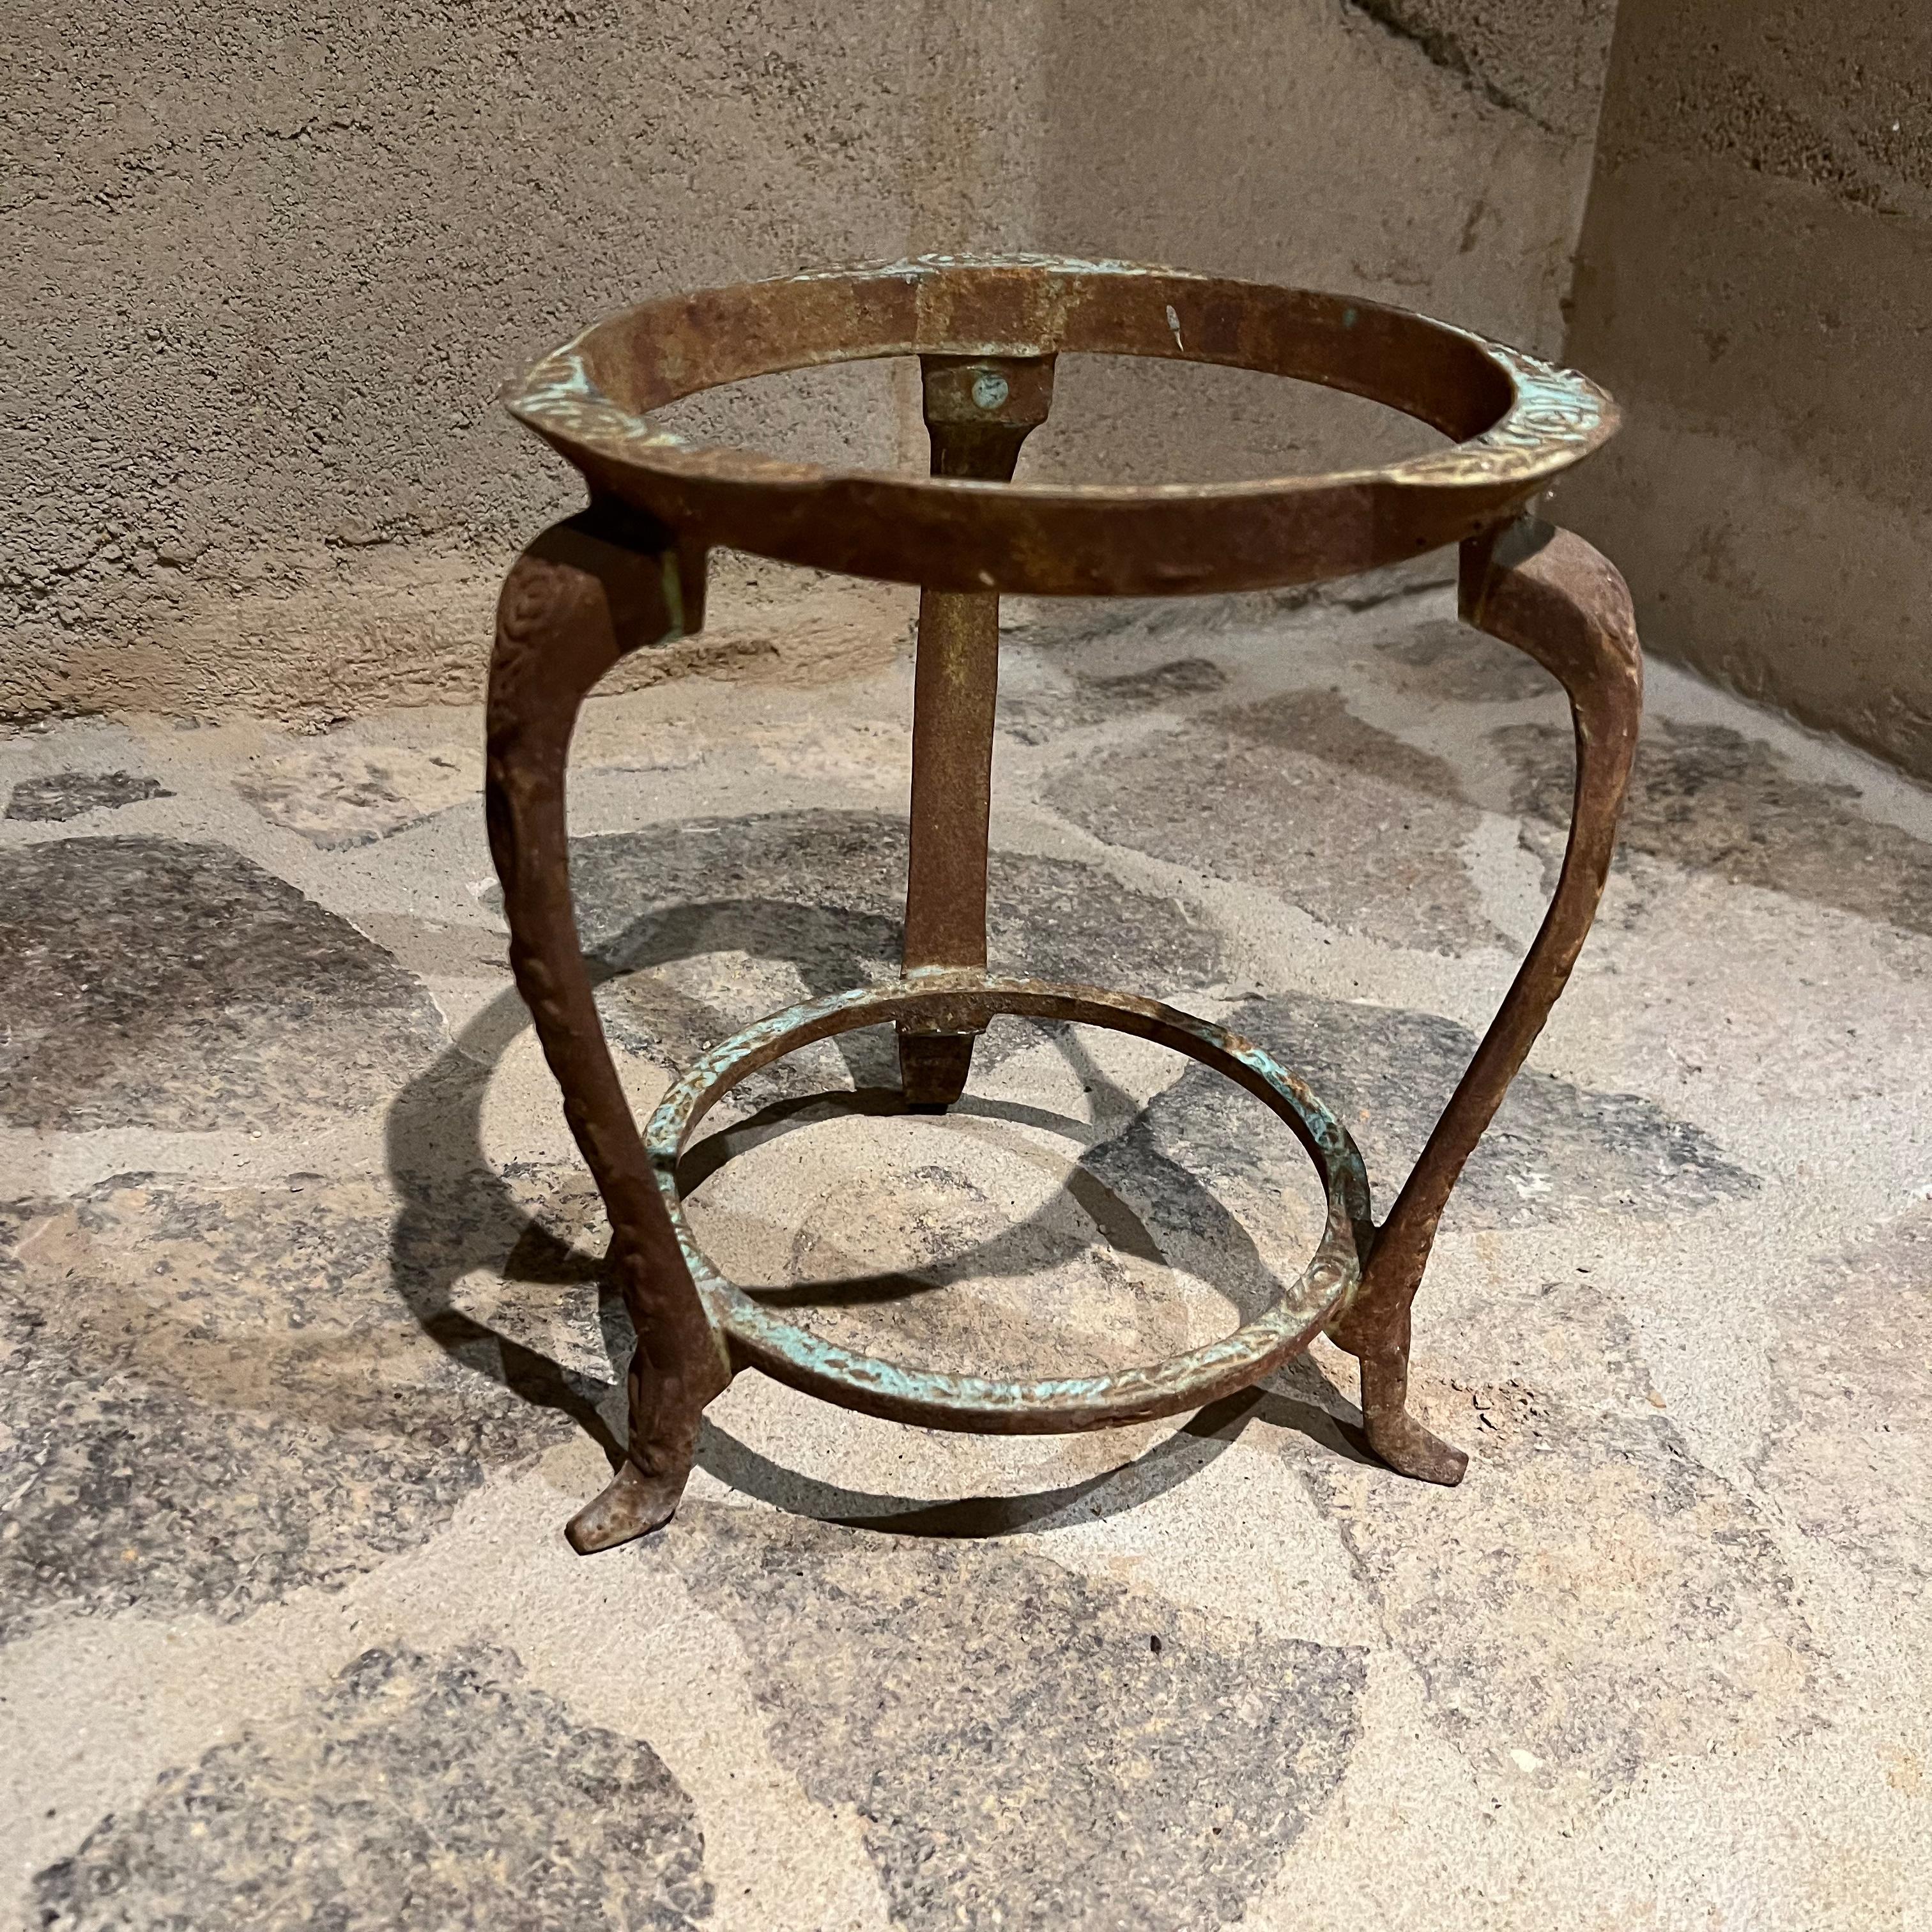 1950s Vintage Elegance Round Planter Pedestal Stand Lovely Ornamentation In Distressed Condition For Sale In Chula Vista, CA